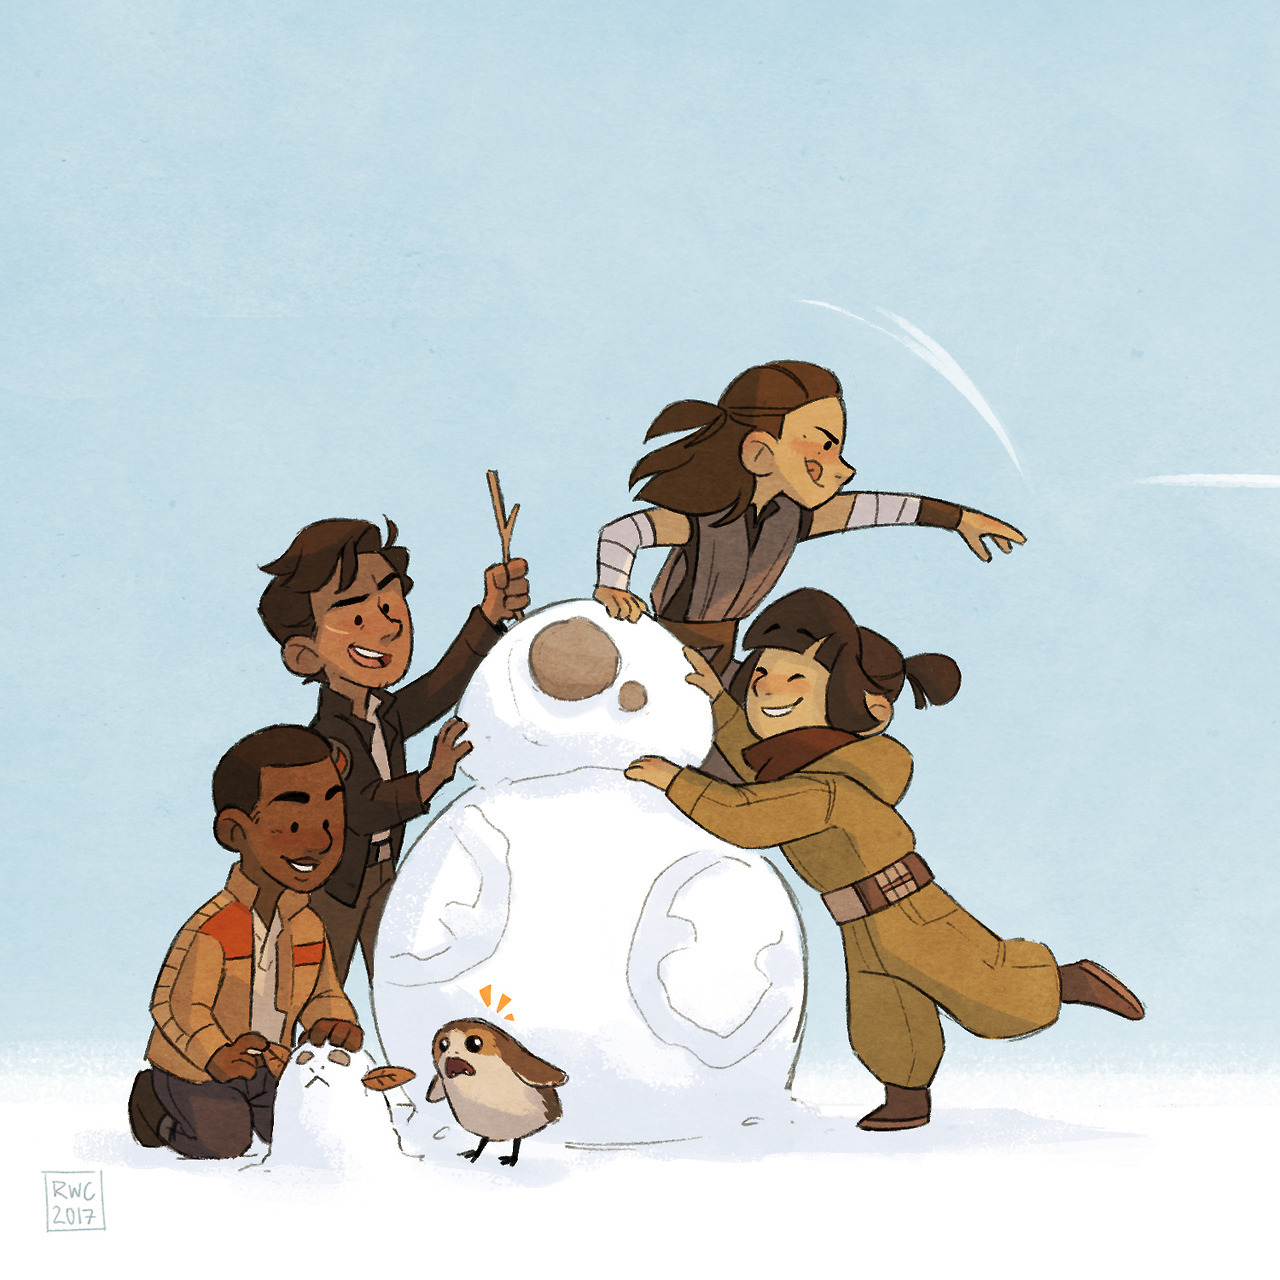 reb-chan: Merry Christmas and Happy Holidays! Here’s some TLJ shenanigans :&gt;